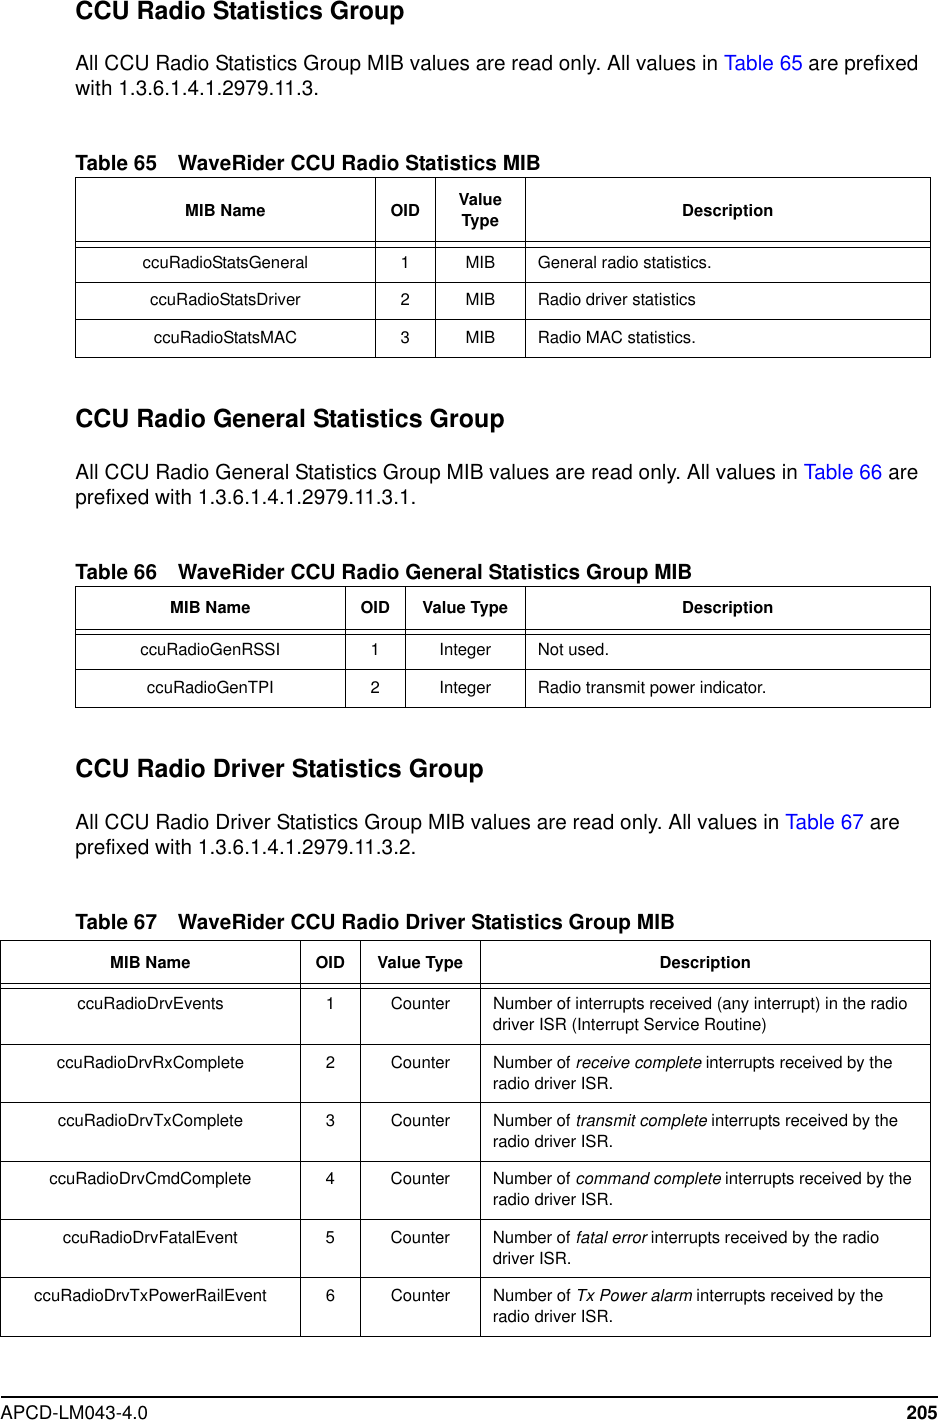 APCD-LM043-4.0 205CCU Radio Statistics GroupAll CCU Radio Statistics Group MIB values are read only. All values in Table 65 are prefixedwith 1.3.6.1.4.1.2979.11.3.Table 65 WaveRider CCU Radio Statistics MIBCCU Radio General Statistics GroupAll CCU Radio General Statistics Group MIB values are read only. All values in Table 66 areprefixed with 1.3.6.1.4.1.2979.11.3.1.Table 66 WaveRider CCU Radio General Statistics Group MIBCCU Radio Driver Statistics GroupAll CCU Radio Driver Statistics Group MIB values are read only. All values in Table 67 areprefixed with 1.3.6.1.4.1.2979.11.3.2.Table 67 WaveRider CCU Radio Driver Statistics Group MIBMIB Name OID ValueType DescriptionccuRadioStatsGeneral 1 MIB General radio statistics.ccuRadioStatsDriver 2MIB Radio driver statisticsccuRadioStatsMAC 3MIB Radio MAC statistics.MIB Name OID Value Type DescriptionccuRadioGenRSSI 1 Integer Not used.ccuRadioGenTPI 2Integer Radio transmit power indicator.MIB Name OID Value Type DescriptionccuRadioDrvEvents 1 Counter Number of interrupts received (any interrupt) in the radiodriver ISR (Interrupt Service Routine)ccuRadioDrvRxComplete 2 Counter Number of receive complete interrupts received by theradio driver ISR.ccuRadioDrvTxComplete 3 Counter Number of transmit complete interrupts received by theradio driver ISR.ccuRadioDrvCmdComplete 4 Counter Number of command complete interrupts received by theradio driver ISR.ccuRadioDrvFatalEvent 5 Counter Number of fatal error interrupts received by the radiodriver ISR.ccuRadioDrvTxPowerRailEvent 6 Counter Number of Tx Power alarm interrupts received by theradio driver ISR.